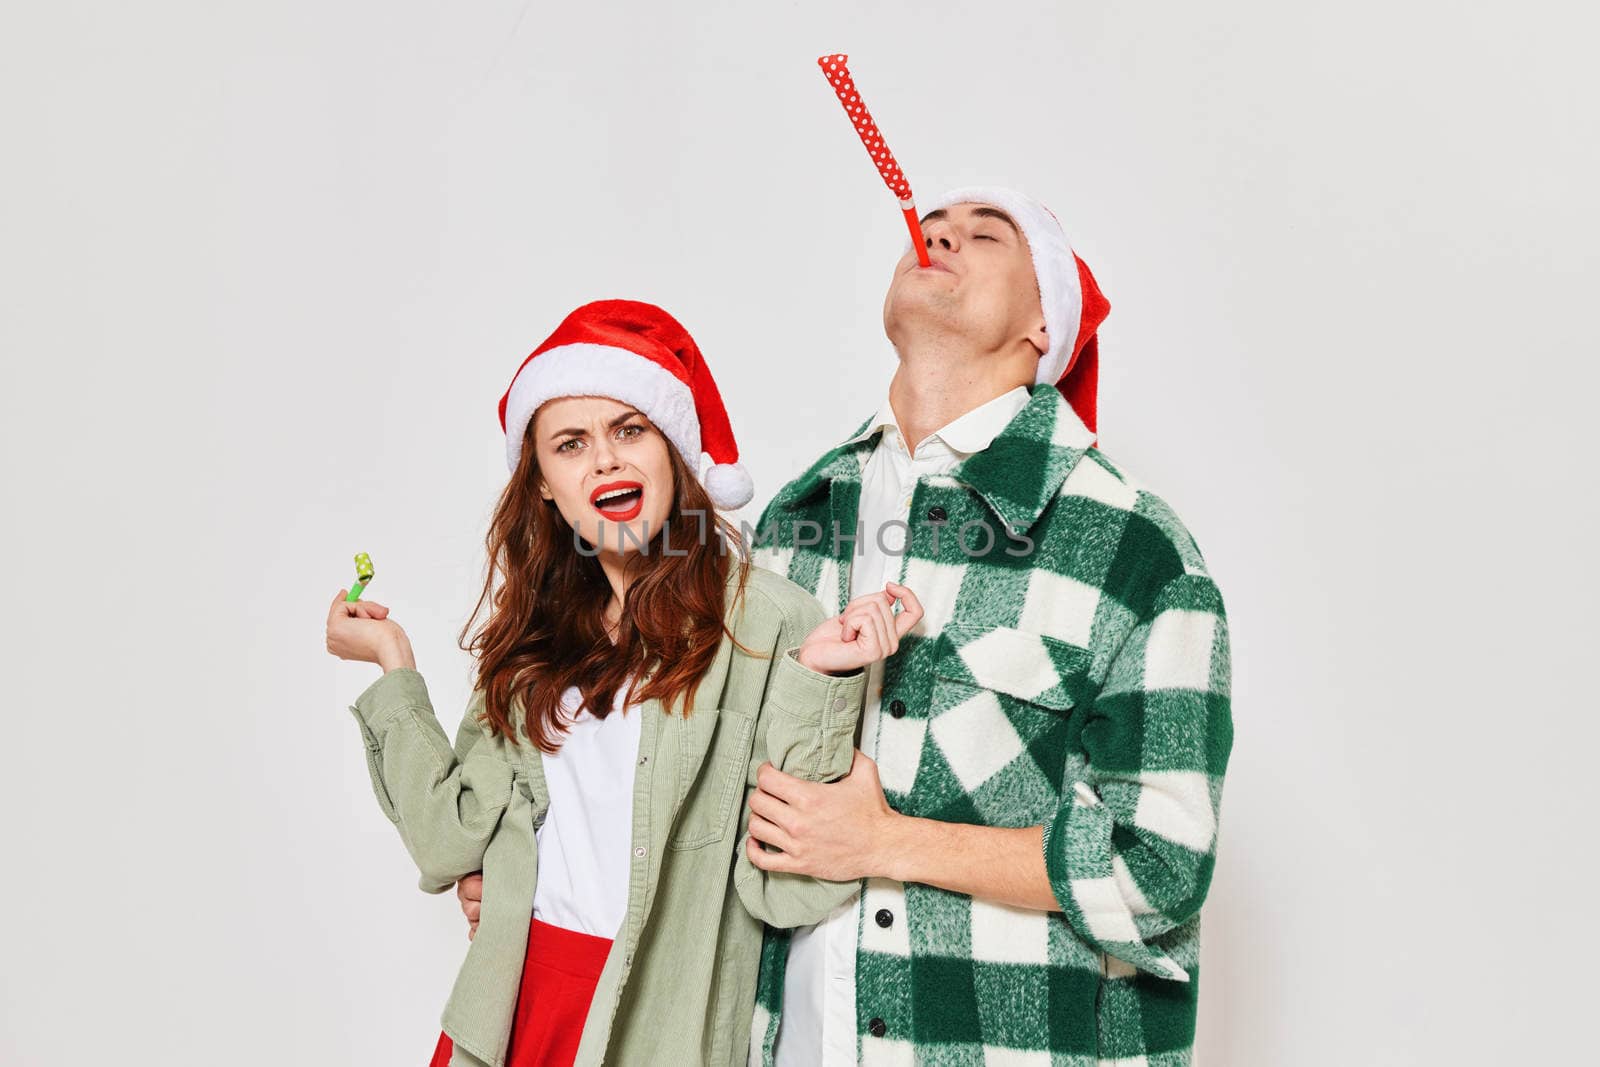 Cheerful man and woman holiday relationship friendship gifts fashion. High quality photo